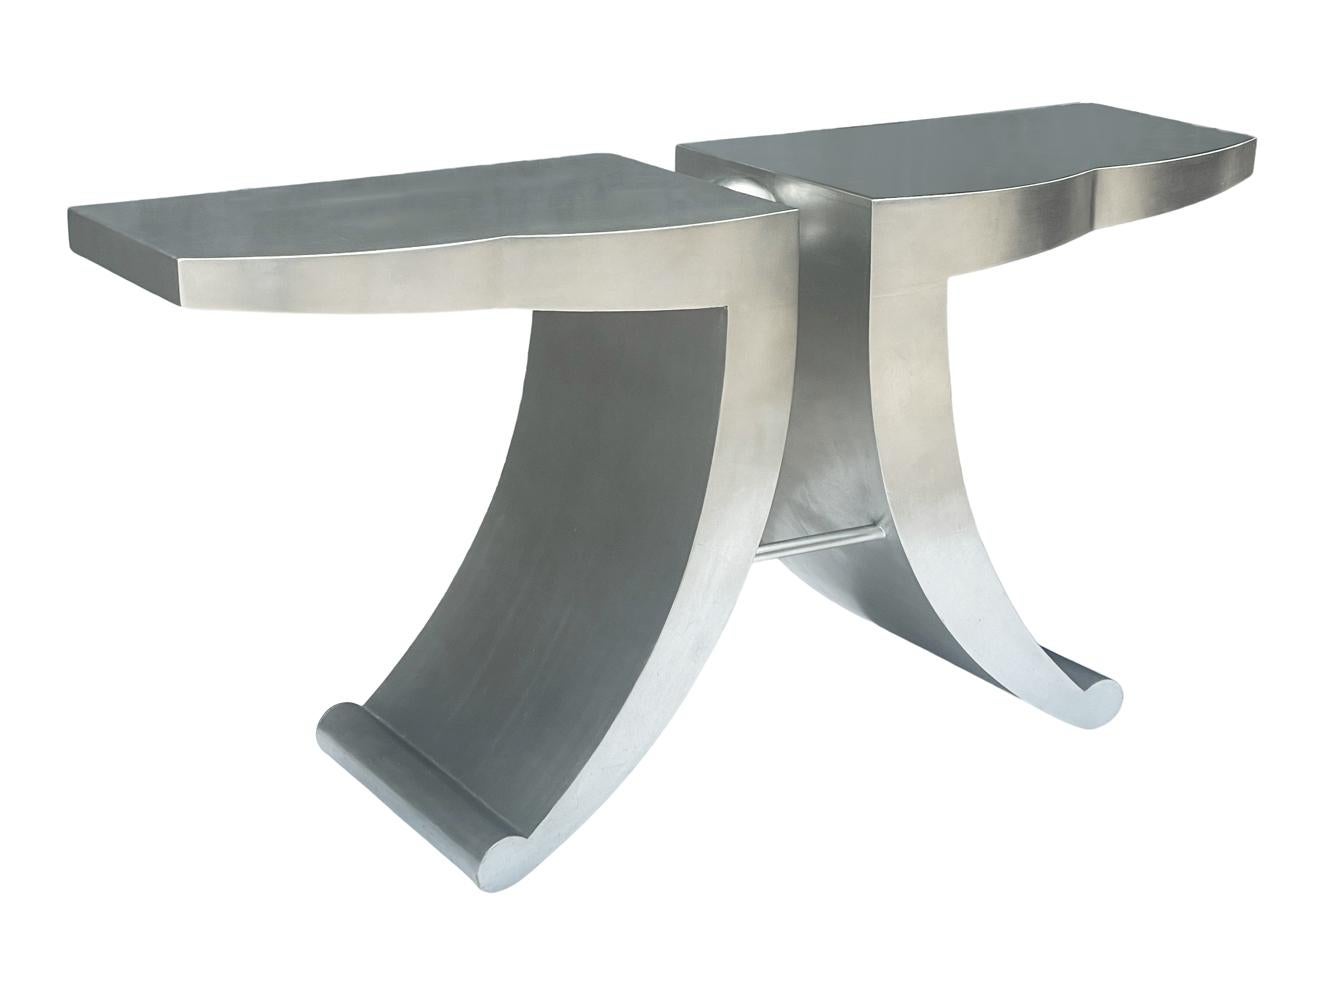 A funky design console table from Italy circa 1990's. It features silver leaf wood with steel construction accents.